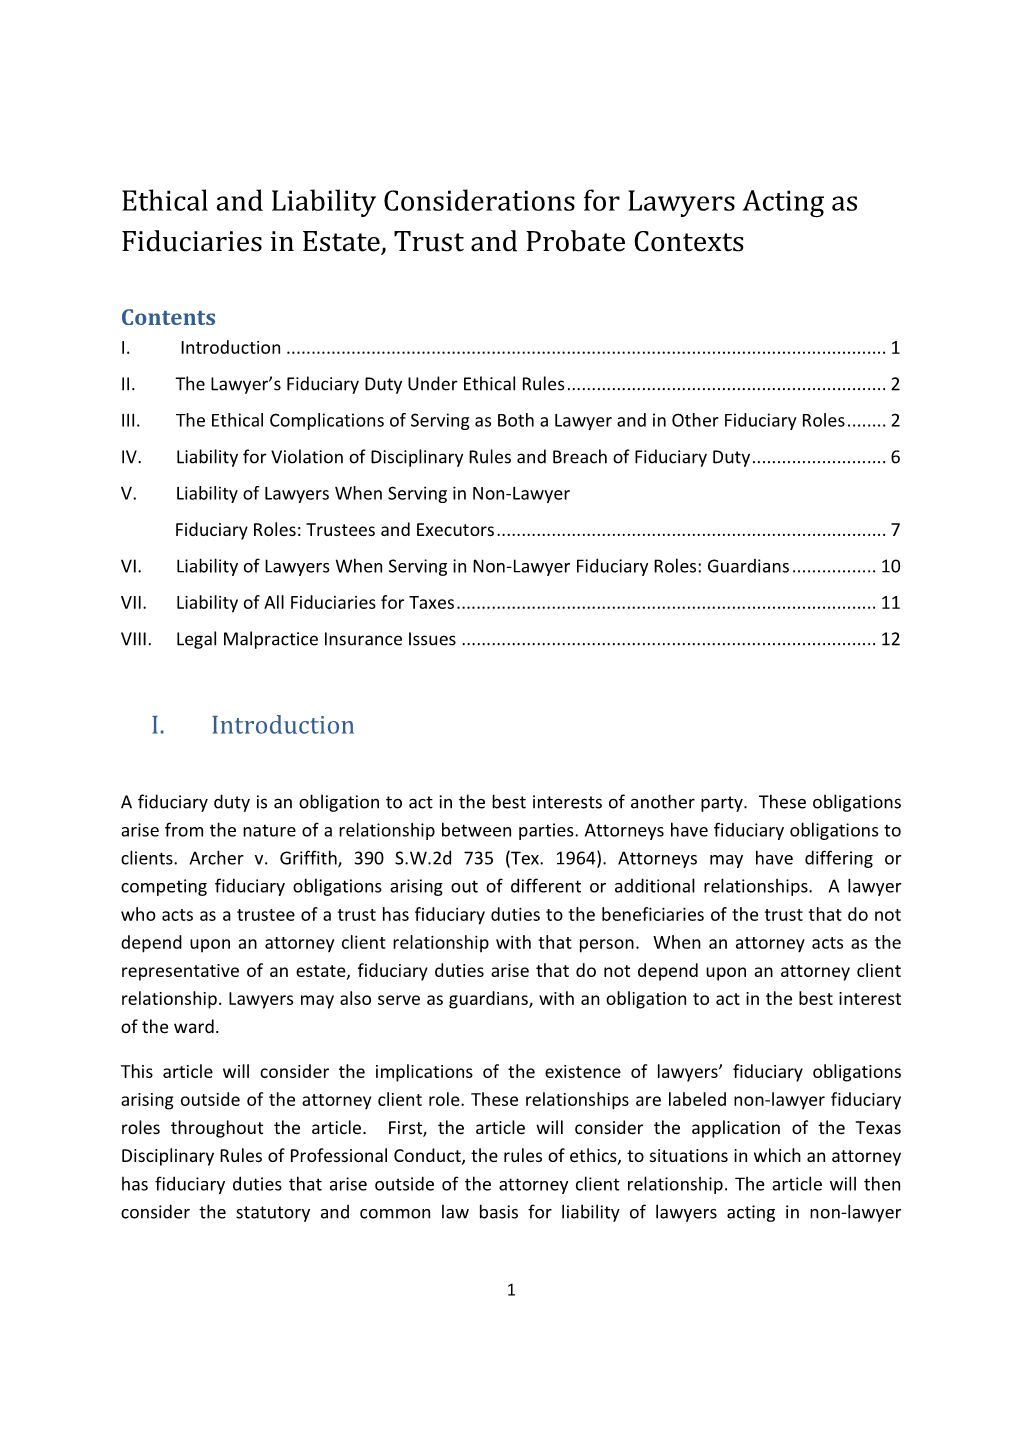 Ethical and Liability Considerations for Lawyers Acting As Fiduciaries in Estate, Trust and Probate Contexts